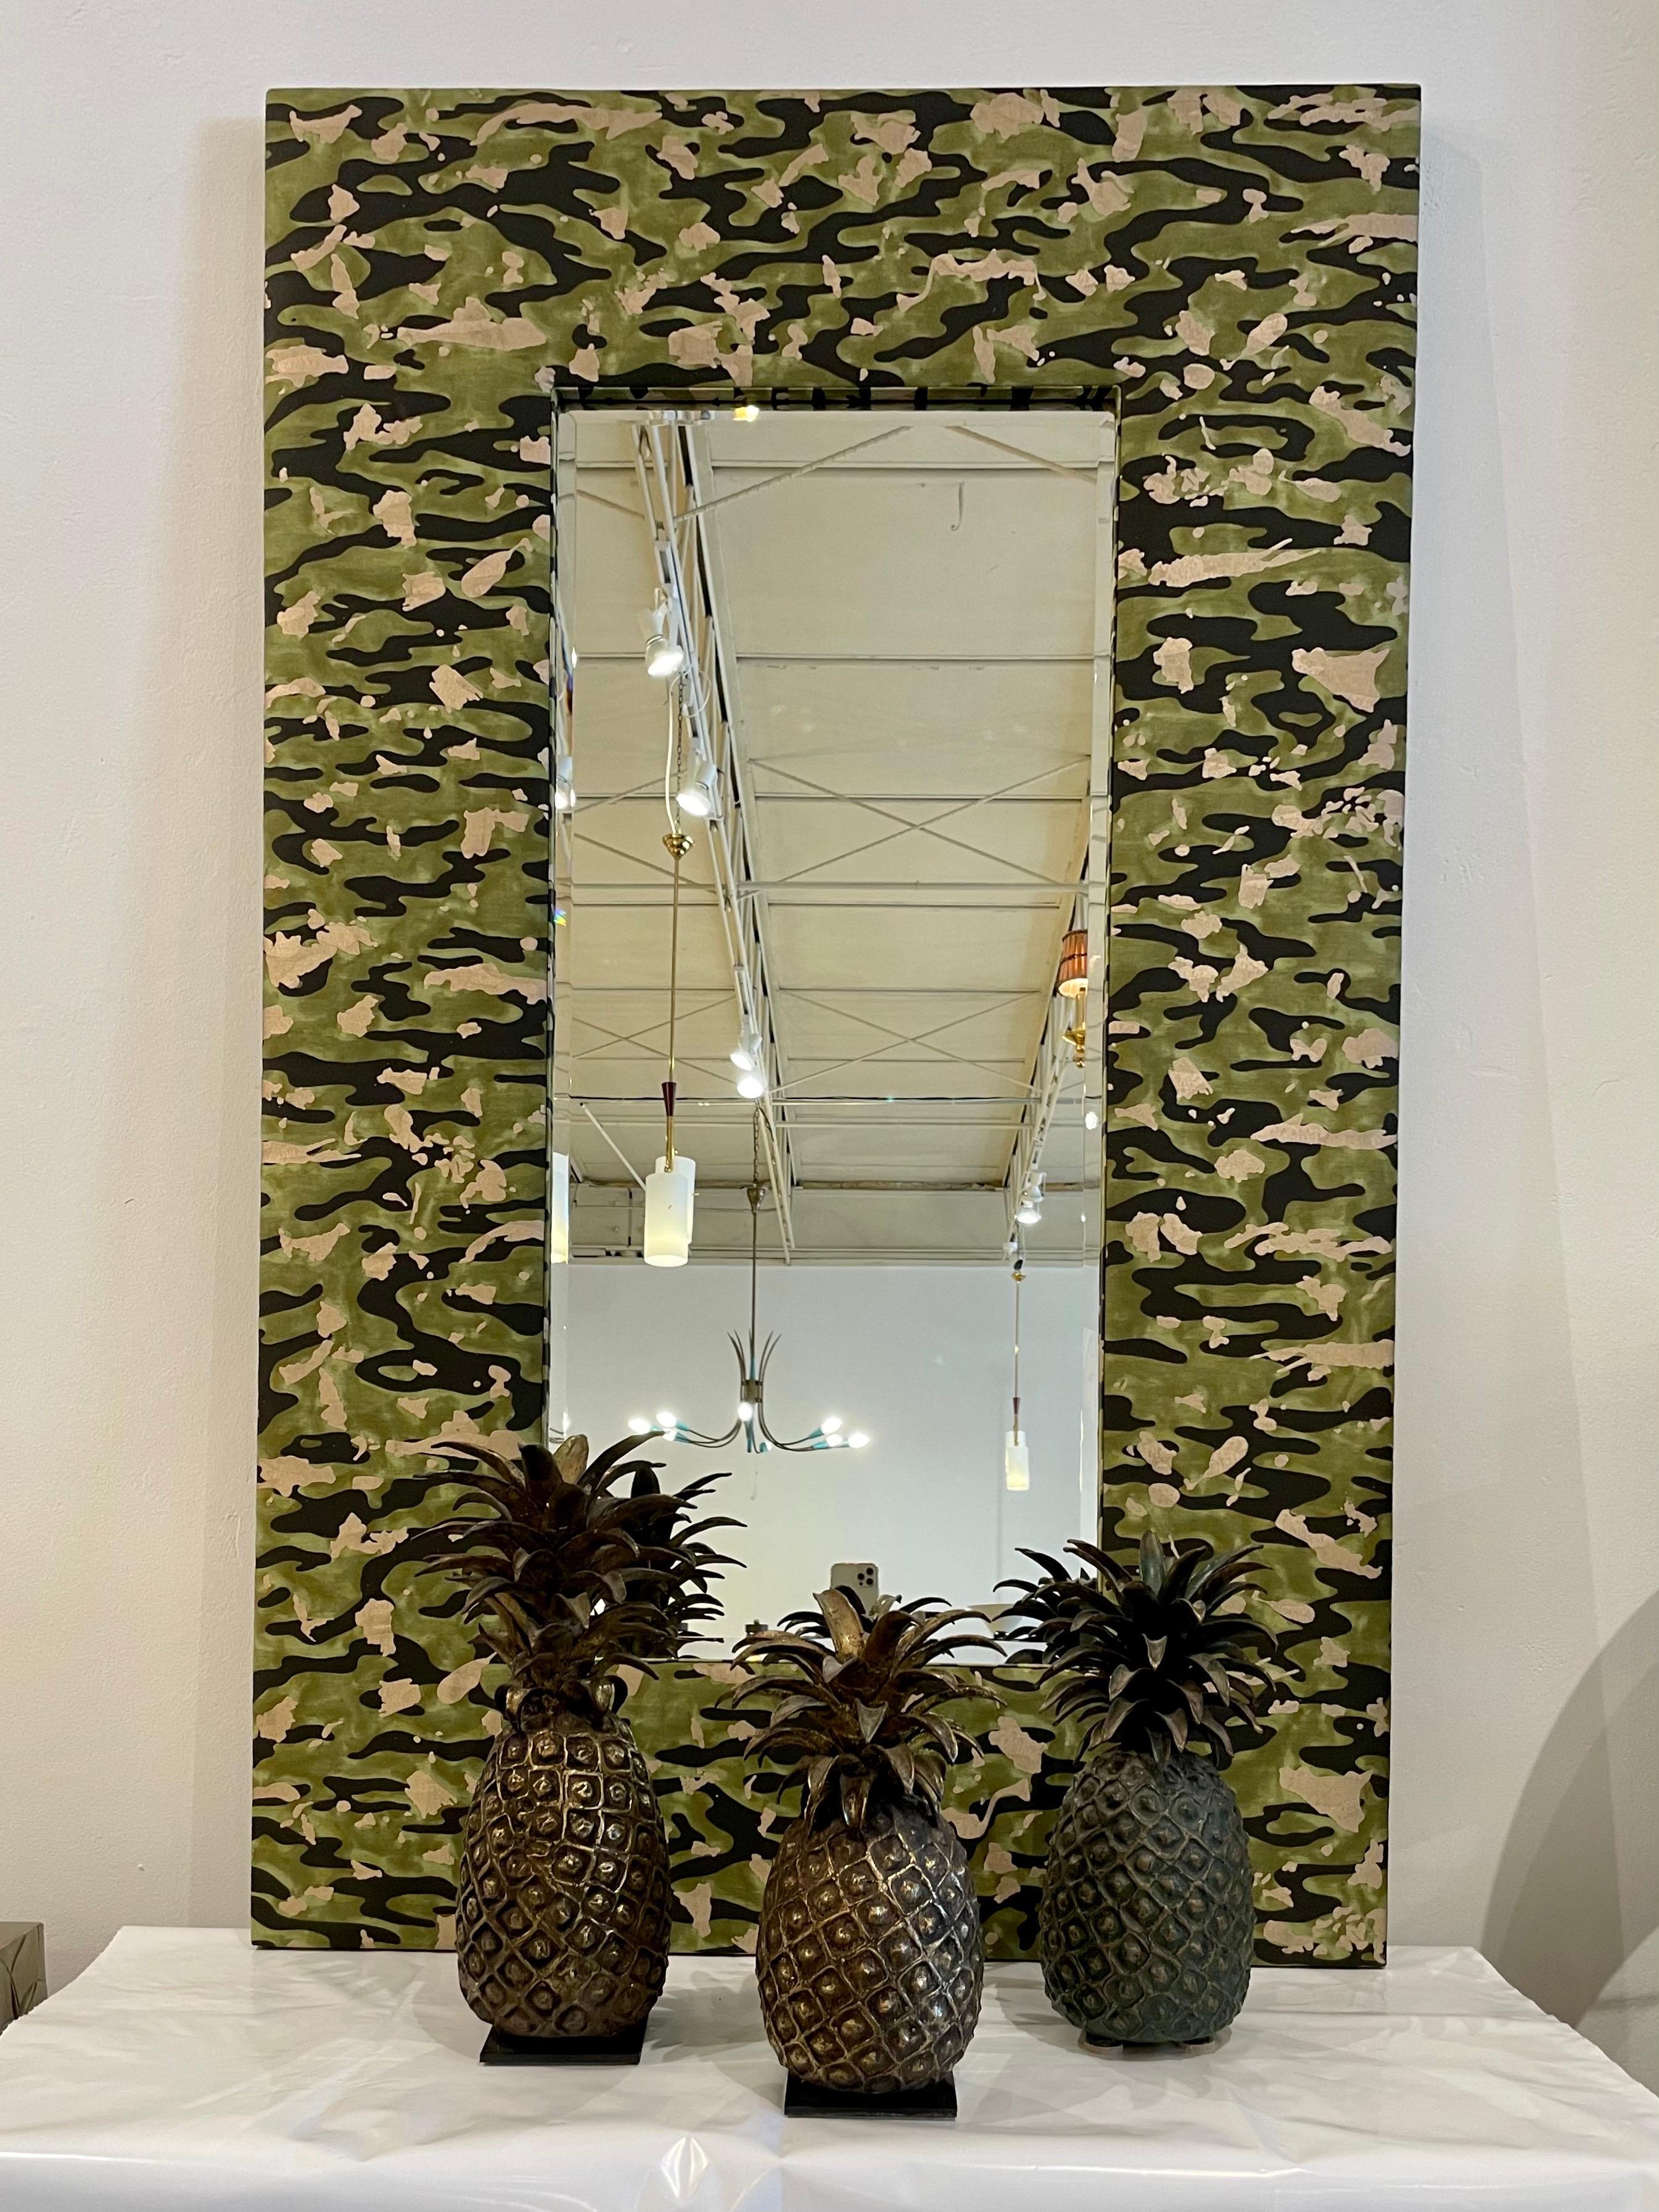 An amazing custom wall mirror in Fortuny cotton fabric and beveled mirror.

This cotton fabric is a Venetian interpretation of traditional camouflage, Fortuny’'s Camo pattern is created from photographs of water and islands as opposed to foliage.